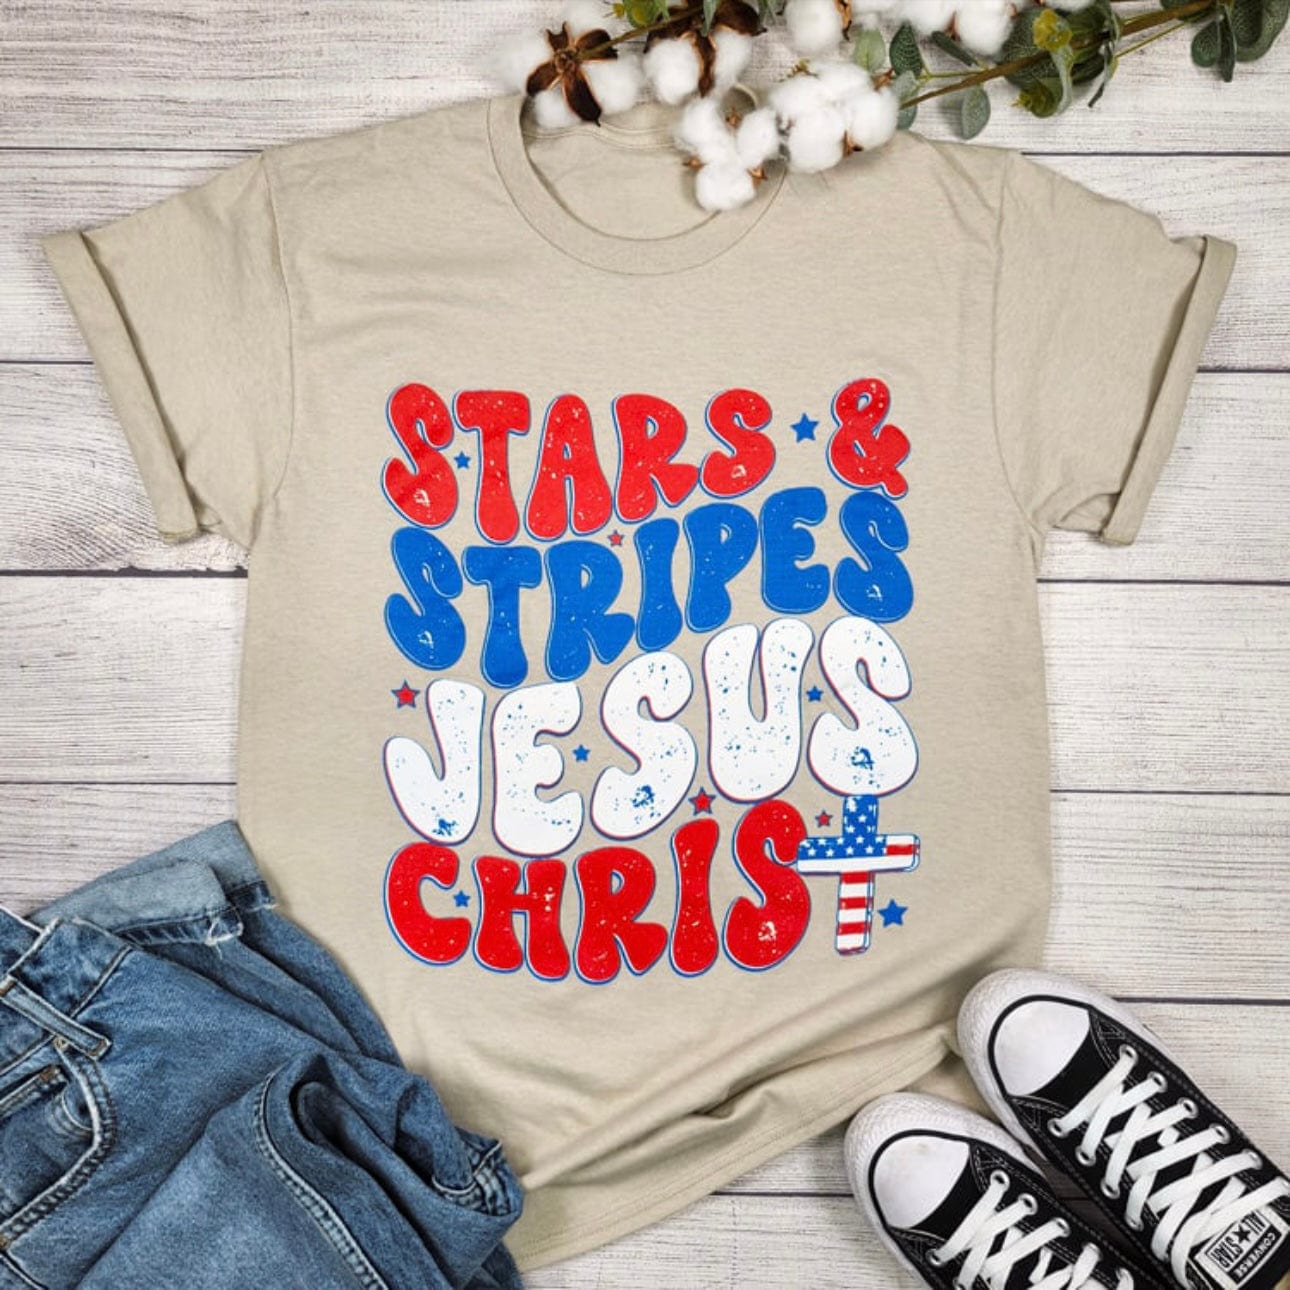 Envy Stylz Boutique Women - Apparel - Shirts - T-Shirts Stars and Stripes and Jesus Christ Graphic Tee